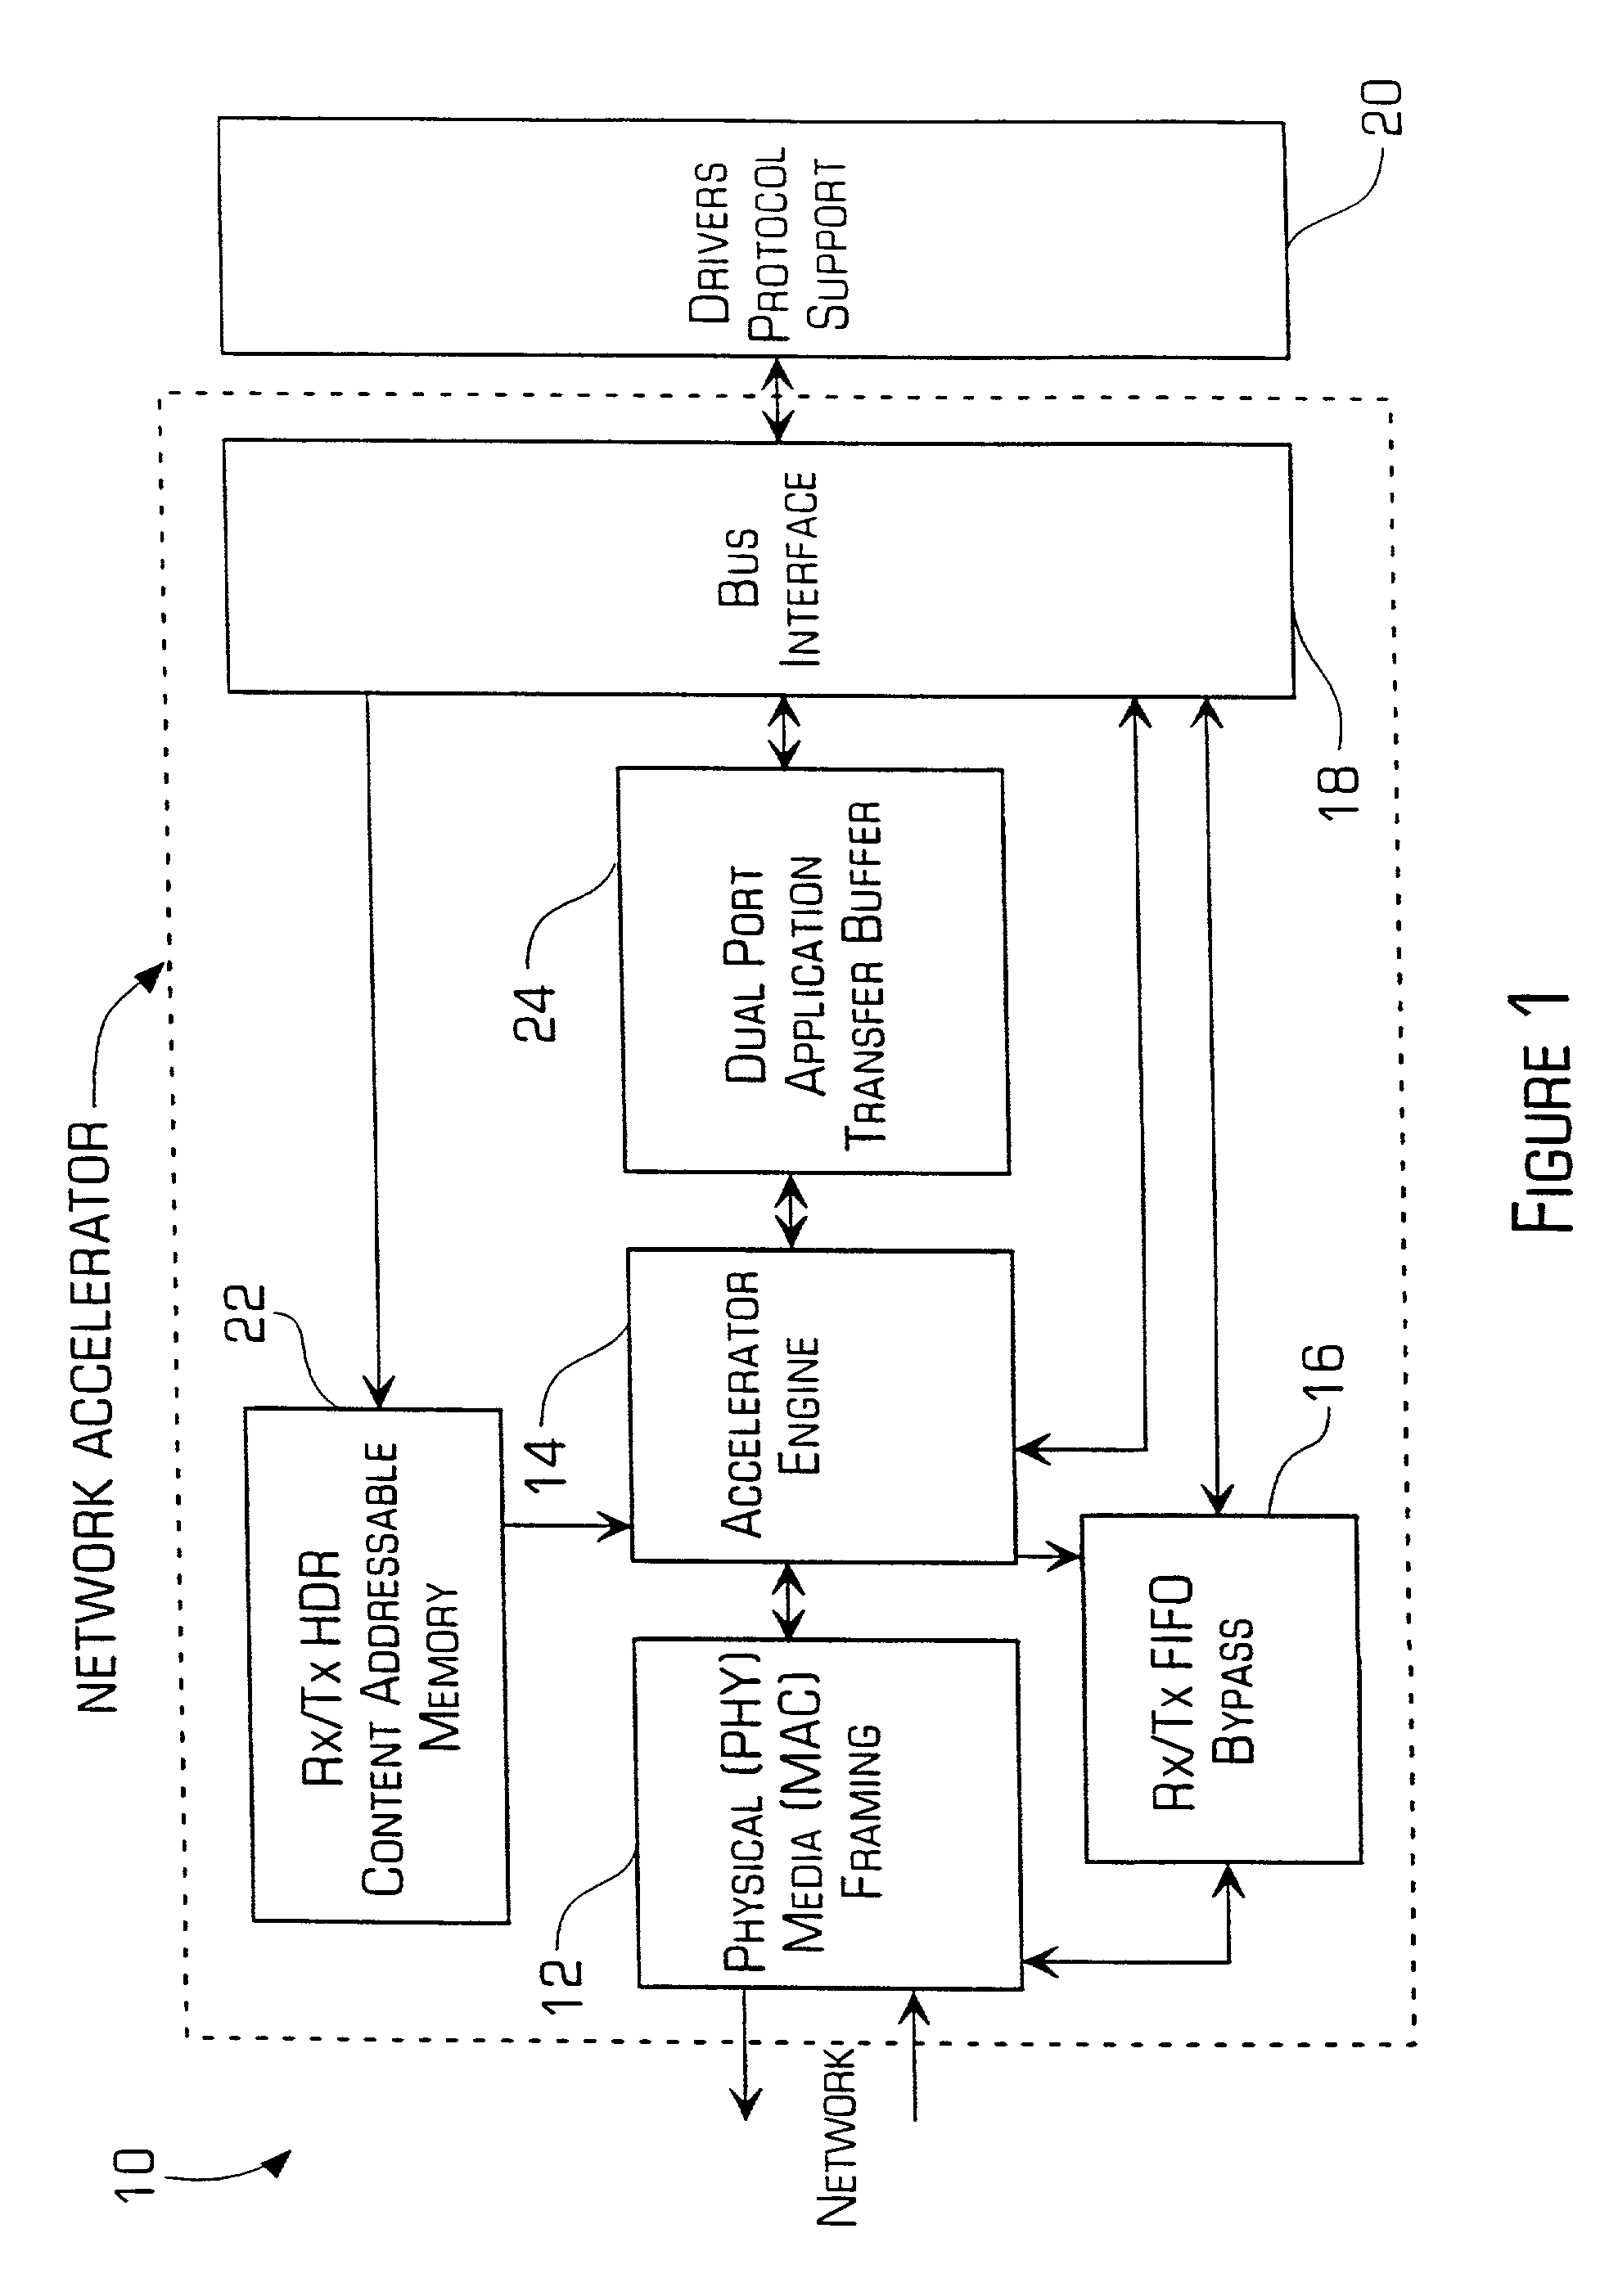 Term addressable memory of an accelerator system and method